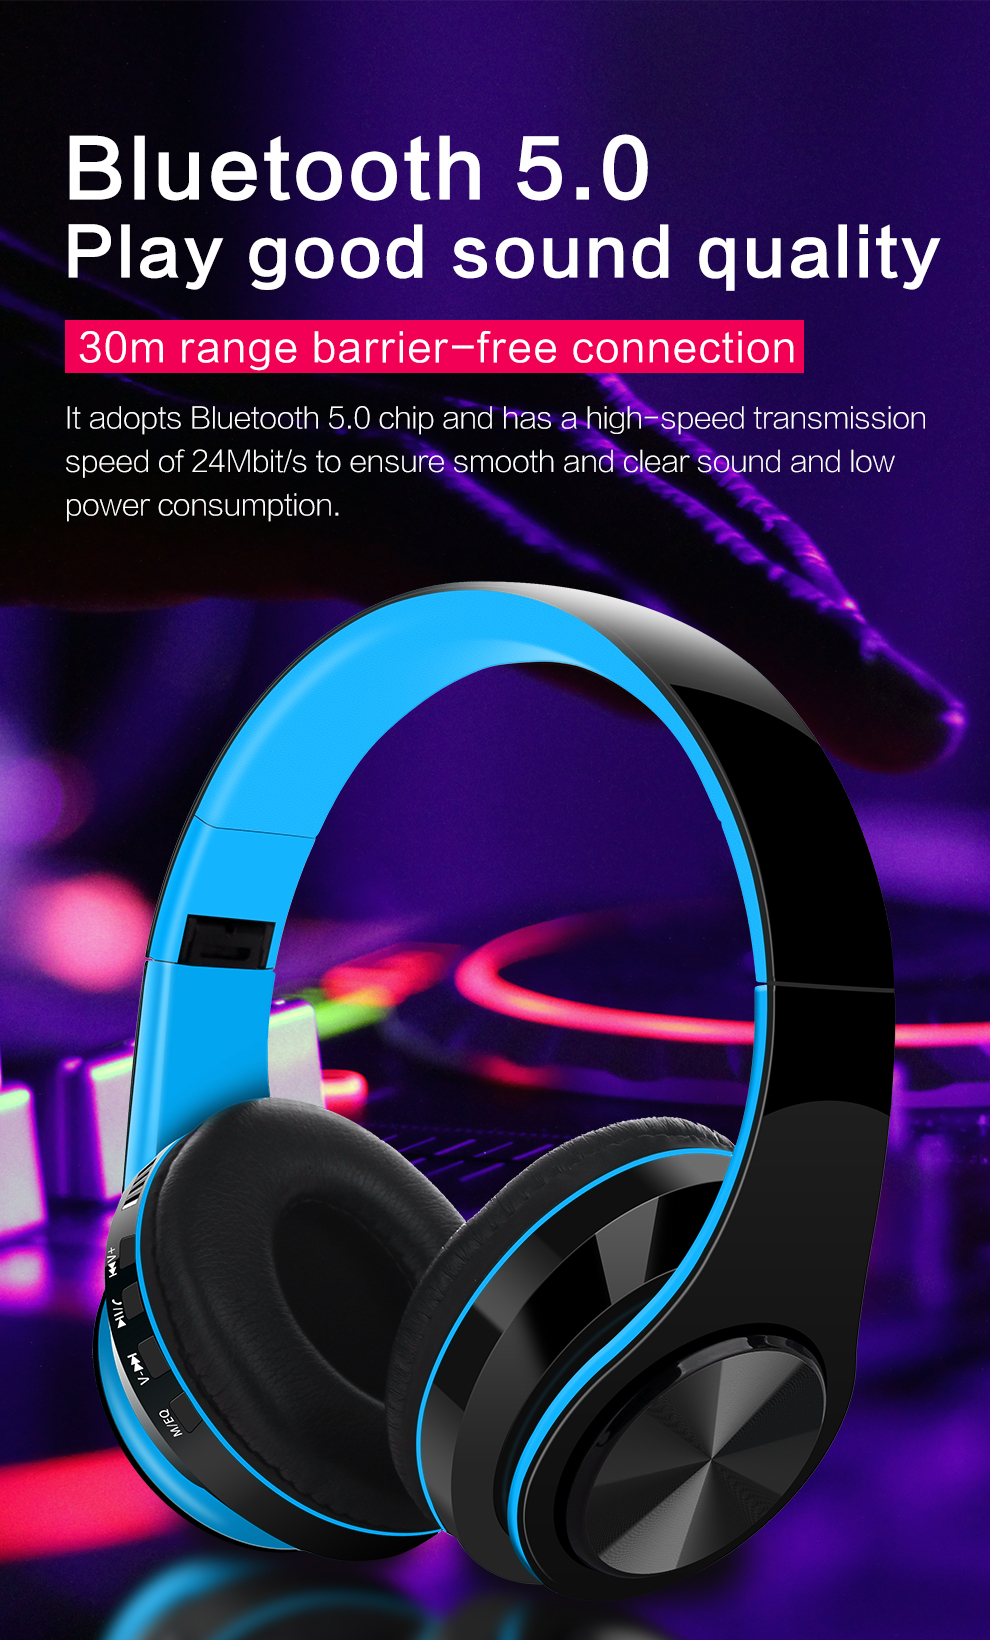 7. LM-FG69 Wireless Bluetooth Headset Bulk Corporate Purchase from China Union Power -Description-